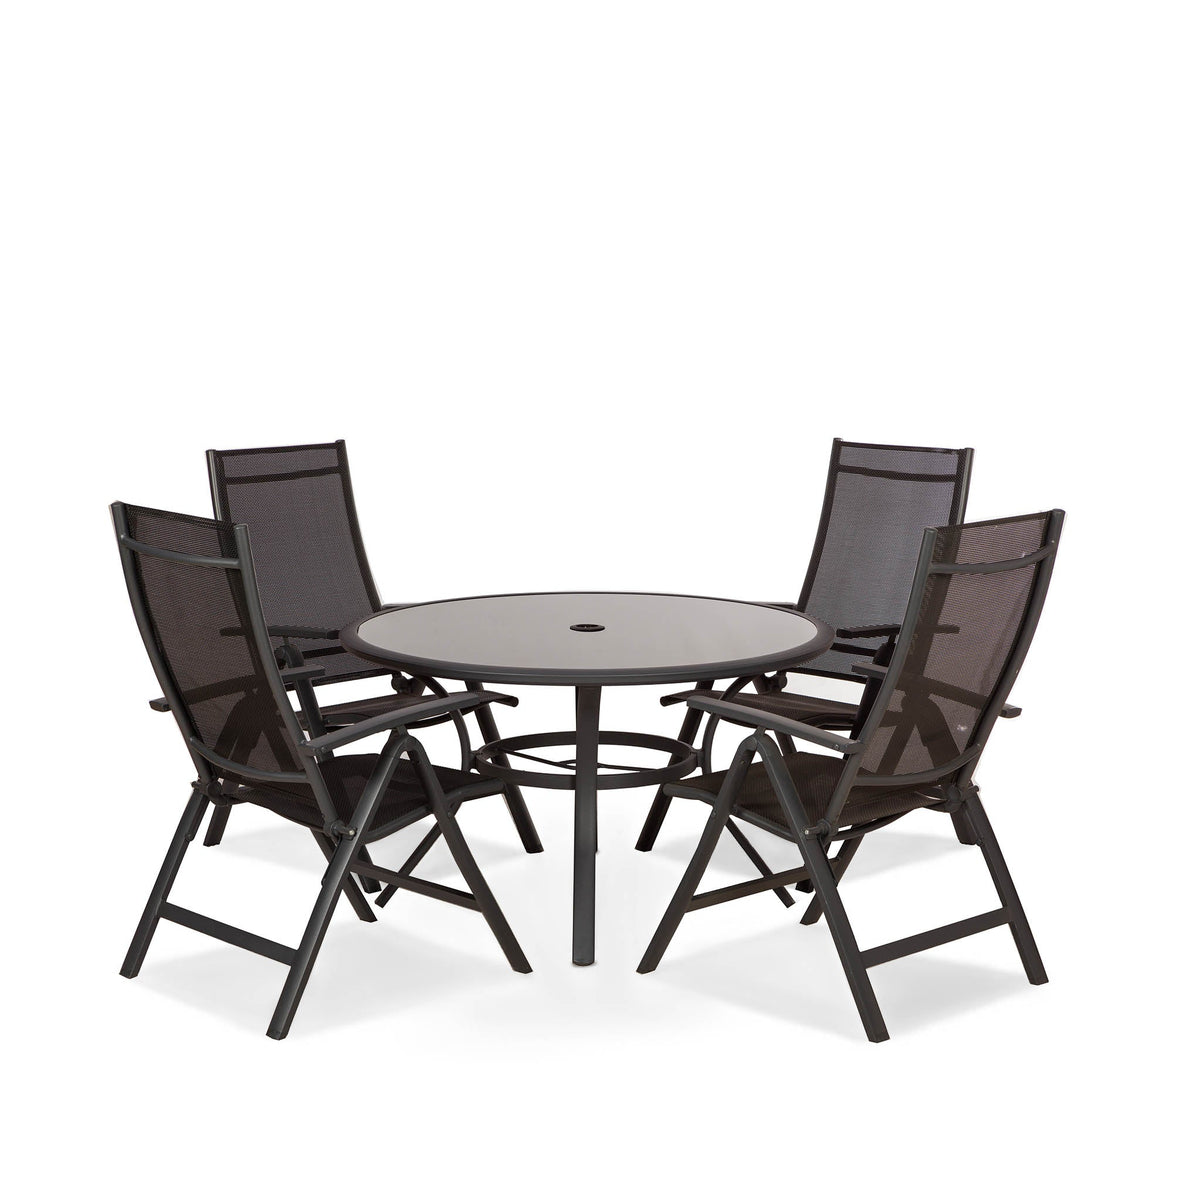 Sorrento Multi Positional 4 Seat Outdoor Dining Set